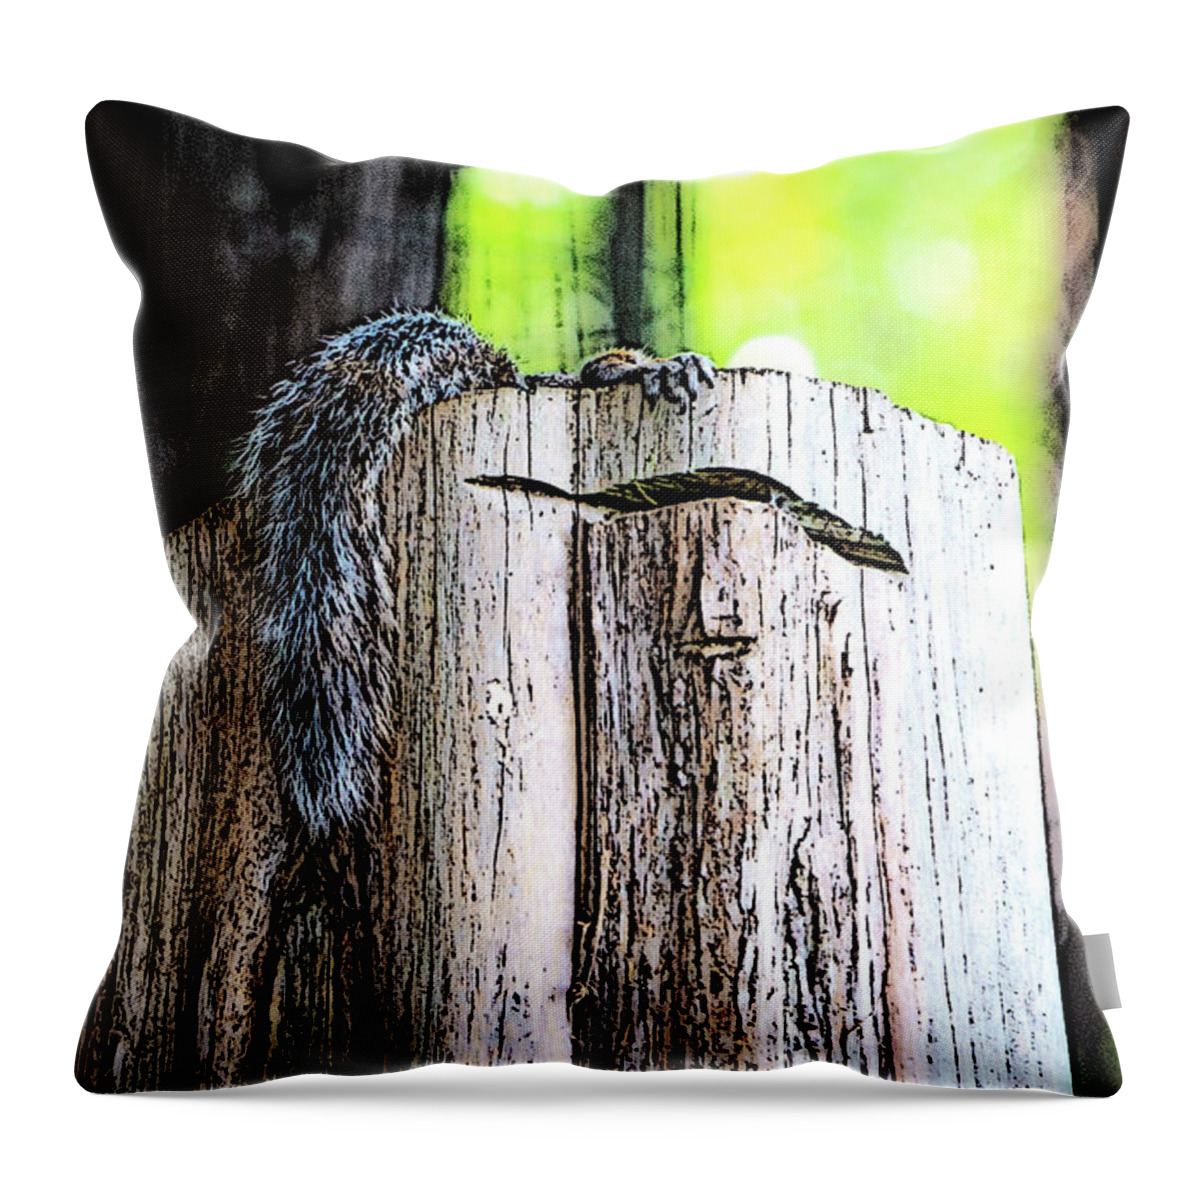 Charlotte-park Throw Pillow featuring the digital art Squirrel at the Lake by SnapHappy Photos